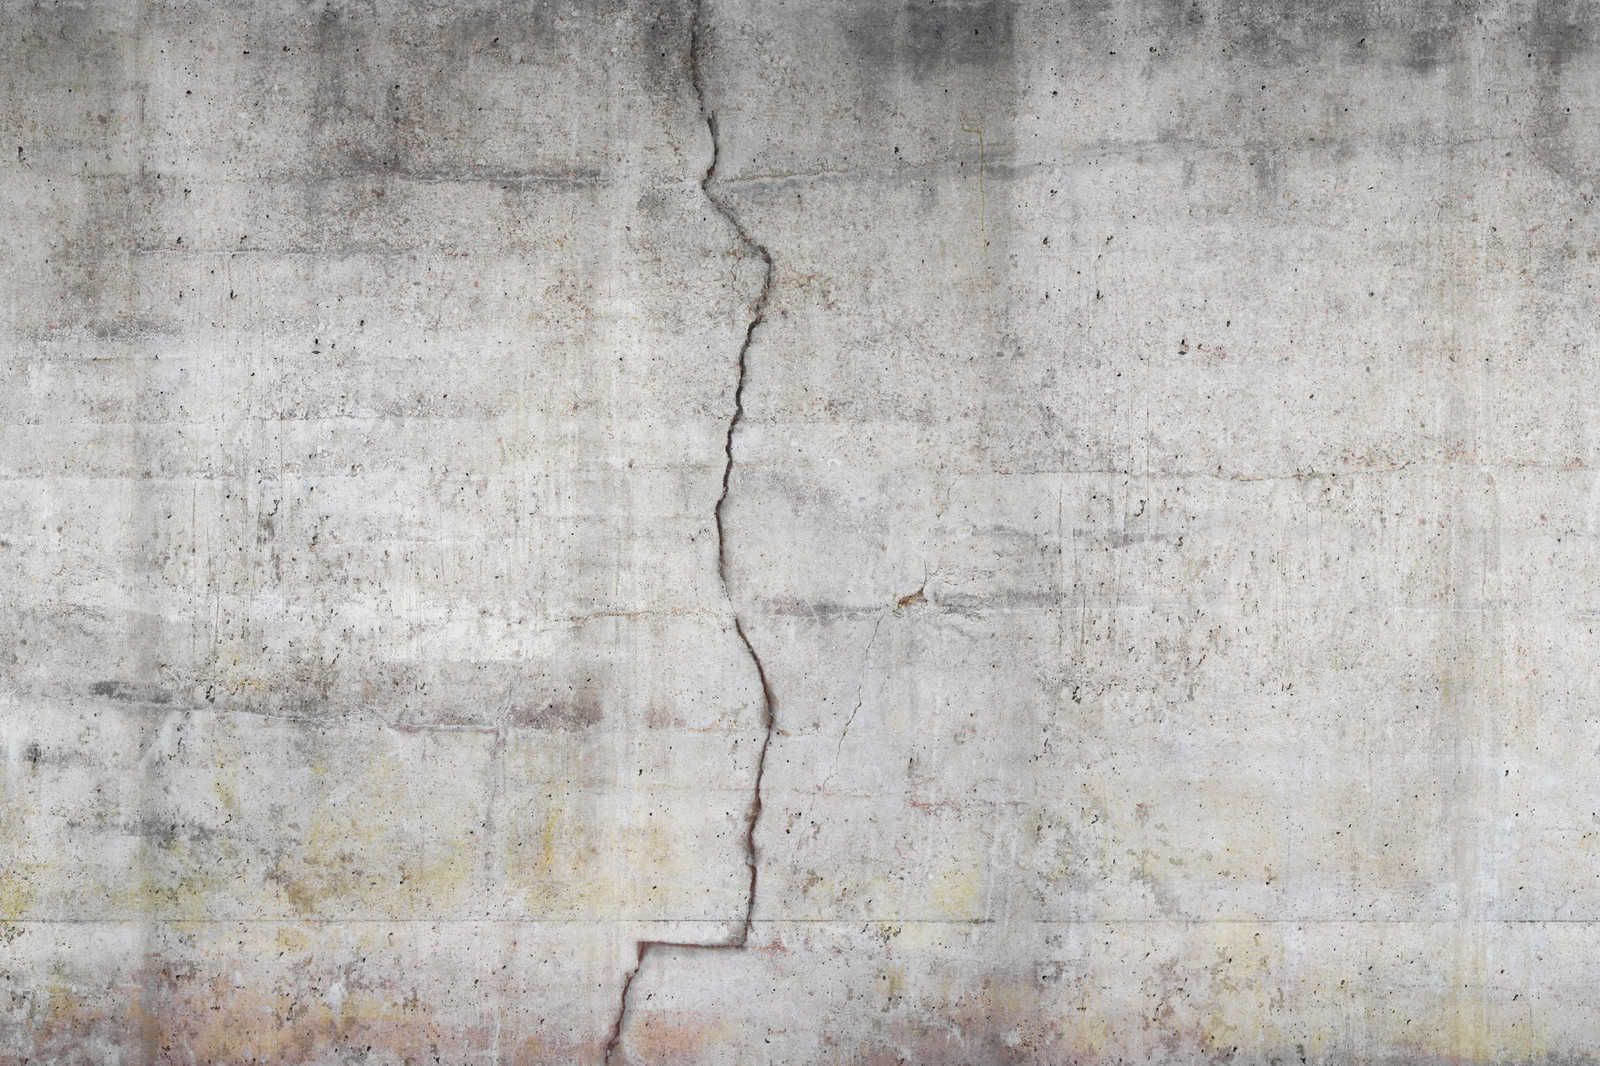             Canvas painting Concrete Wall Optics with Crack - 0,90 m x 0,60 m
        